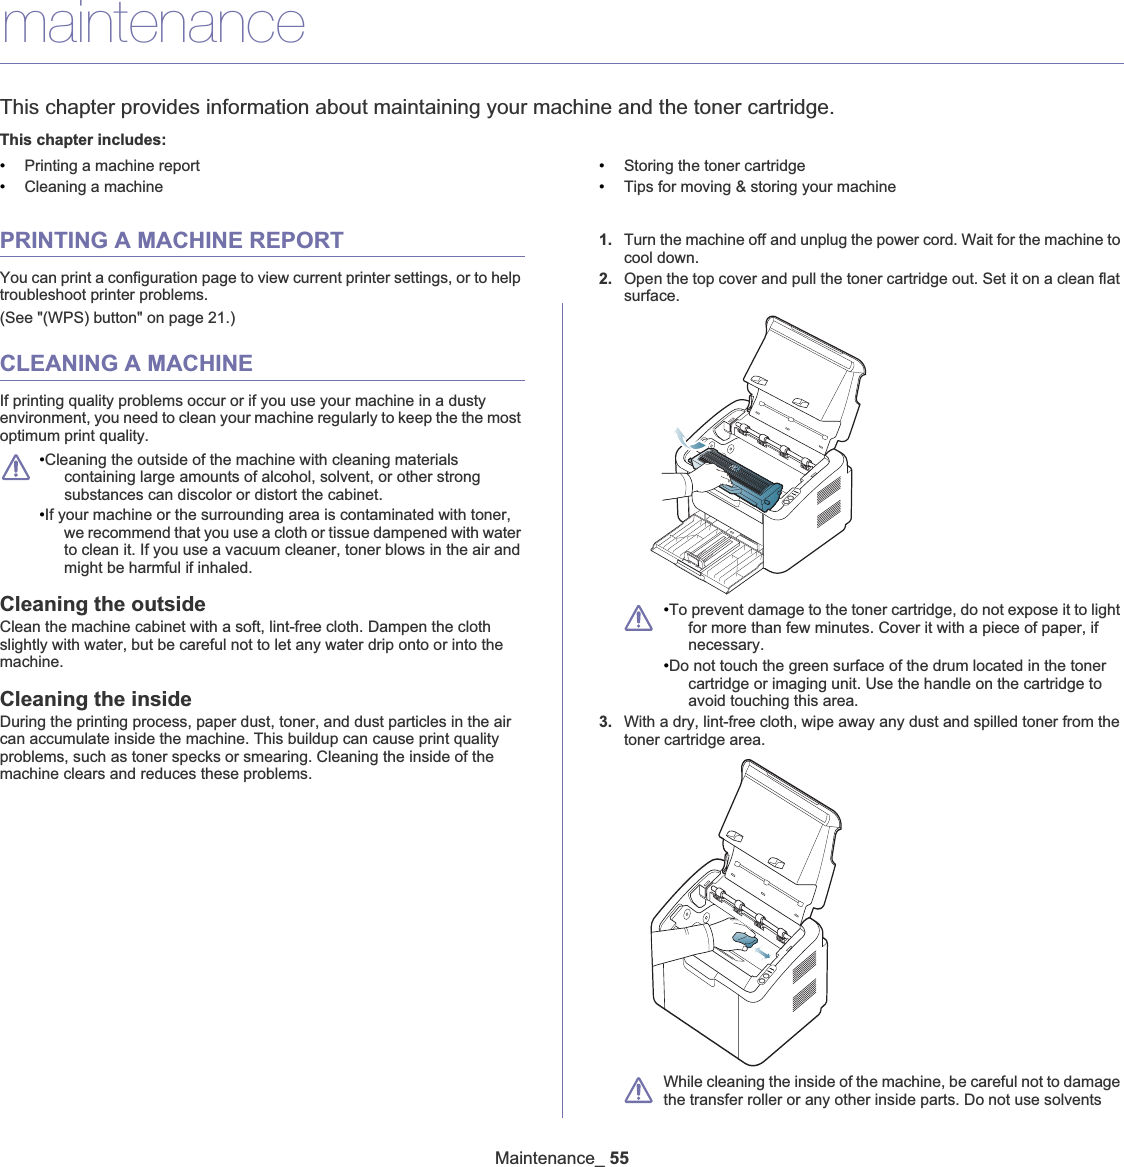 Maintenance_ 558.maintenanceThis chapter provides information about maintaining your machine and the toner cartridge.This chapter includes:•Printing a machine report•Cleaning a machine•Storing the toner cartridge•Tips for moving &amp; storing your machinePRINTING A MACHINE REPORTYou can print a configuration page to view current printer settings, or to help troubleshoot printer problems. (See &quot;(WPS) button&quot; on page 21.)CLEANING A MACHINEIf printing quality problems occur or if you use your machine in a dusty environment, you need to clean your machine regularly to keep the the most optimum print quality.•Cleaning the outside of the machine with cleaning materials containing large amounts of alcohol, solvent, or other strong substances can discolor or distort the cabinet. •If your machine or the surrounding area is contaminated with toner, we recommend that you use a cloth or tissue dampened with water to clean it. If you use a vacuum cleaner, toner blows in the air and might be harmful if inhaled.Cleaning the outsideClean the machine cabinet with a soft, lint-free cloth. Dampen the cloth slightly with water, but be careful not to let any water drip onto or into the machine.Cleaning the insideDuring the printing process, paper dust, toner, and dust particles in the air can accumulate inside the machine. This buildup can cause print quality problems, such as toner specks or smearing. Cleaning the inside of the machine clears and reduces these problems.1. Turn the machine offGand unplug the power cord. Wait for the machine to cool down.2. Open the top cover and pull the toner cartridge out. Set it on a clean flat surface.•To prevent damage to the toner cartridge, do not expose it to light for more than few minutes. Cover it with a piece of paper, if necessary.•Do not touch the green surface of the drum located in the toner cartridge or imaging unit. Use the handle on the cartridge to avoid touching this area.3. With a dry, lint-free cloth, wipe away any dust and spilled toner from the toner cartridge area.While cleaning the inside of the machine, be careful not to damage the transfer roller or any other inside parts. Do not use solvents 